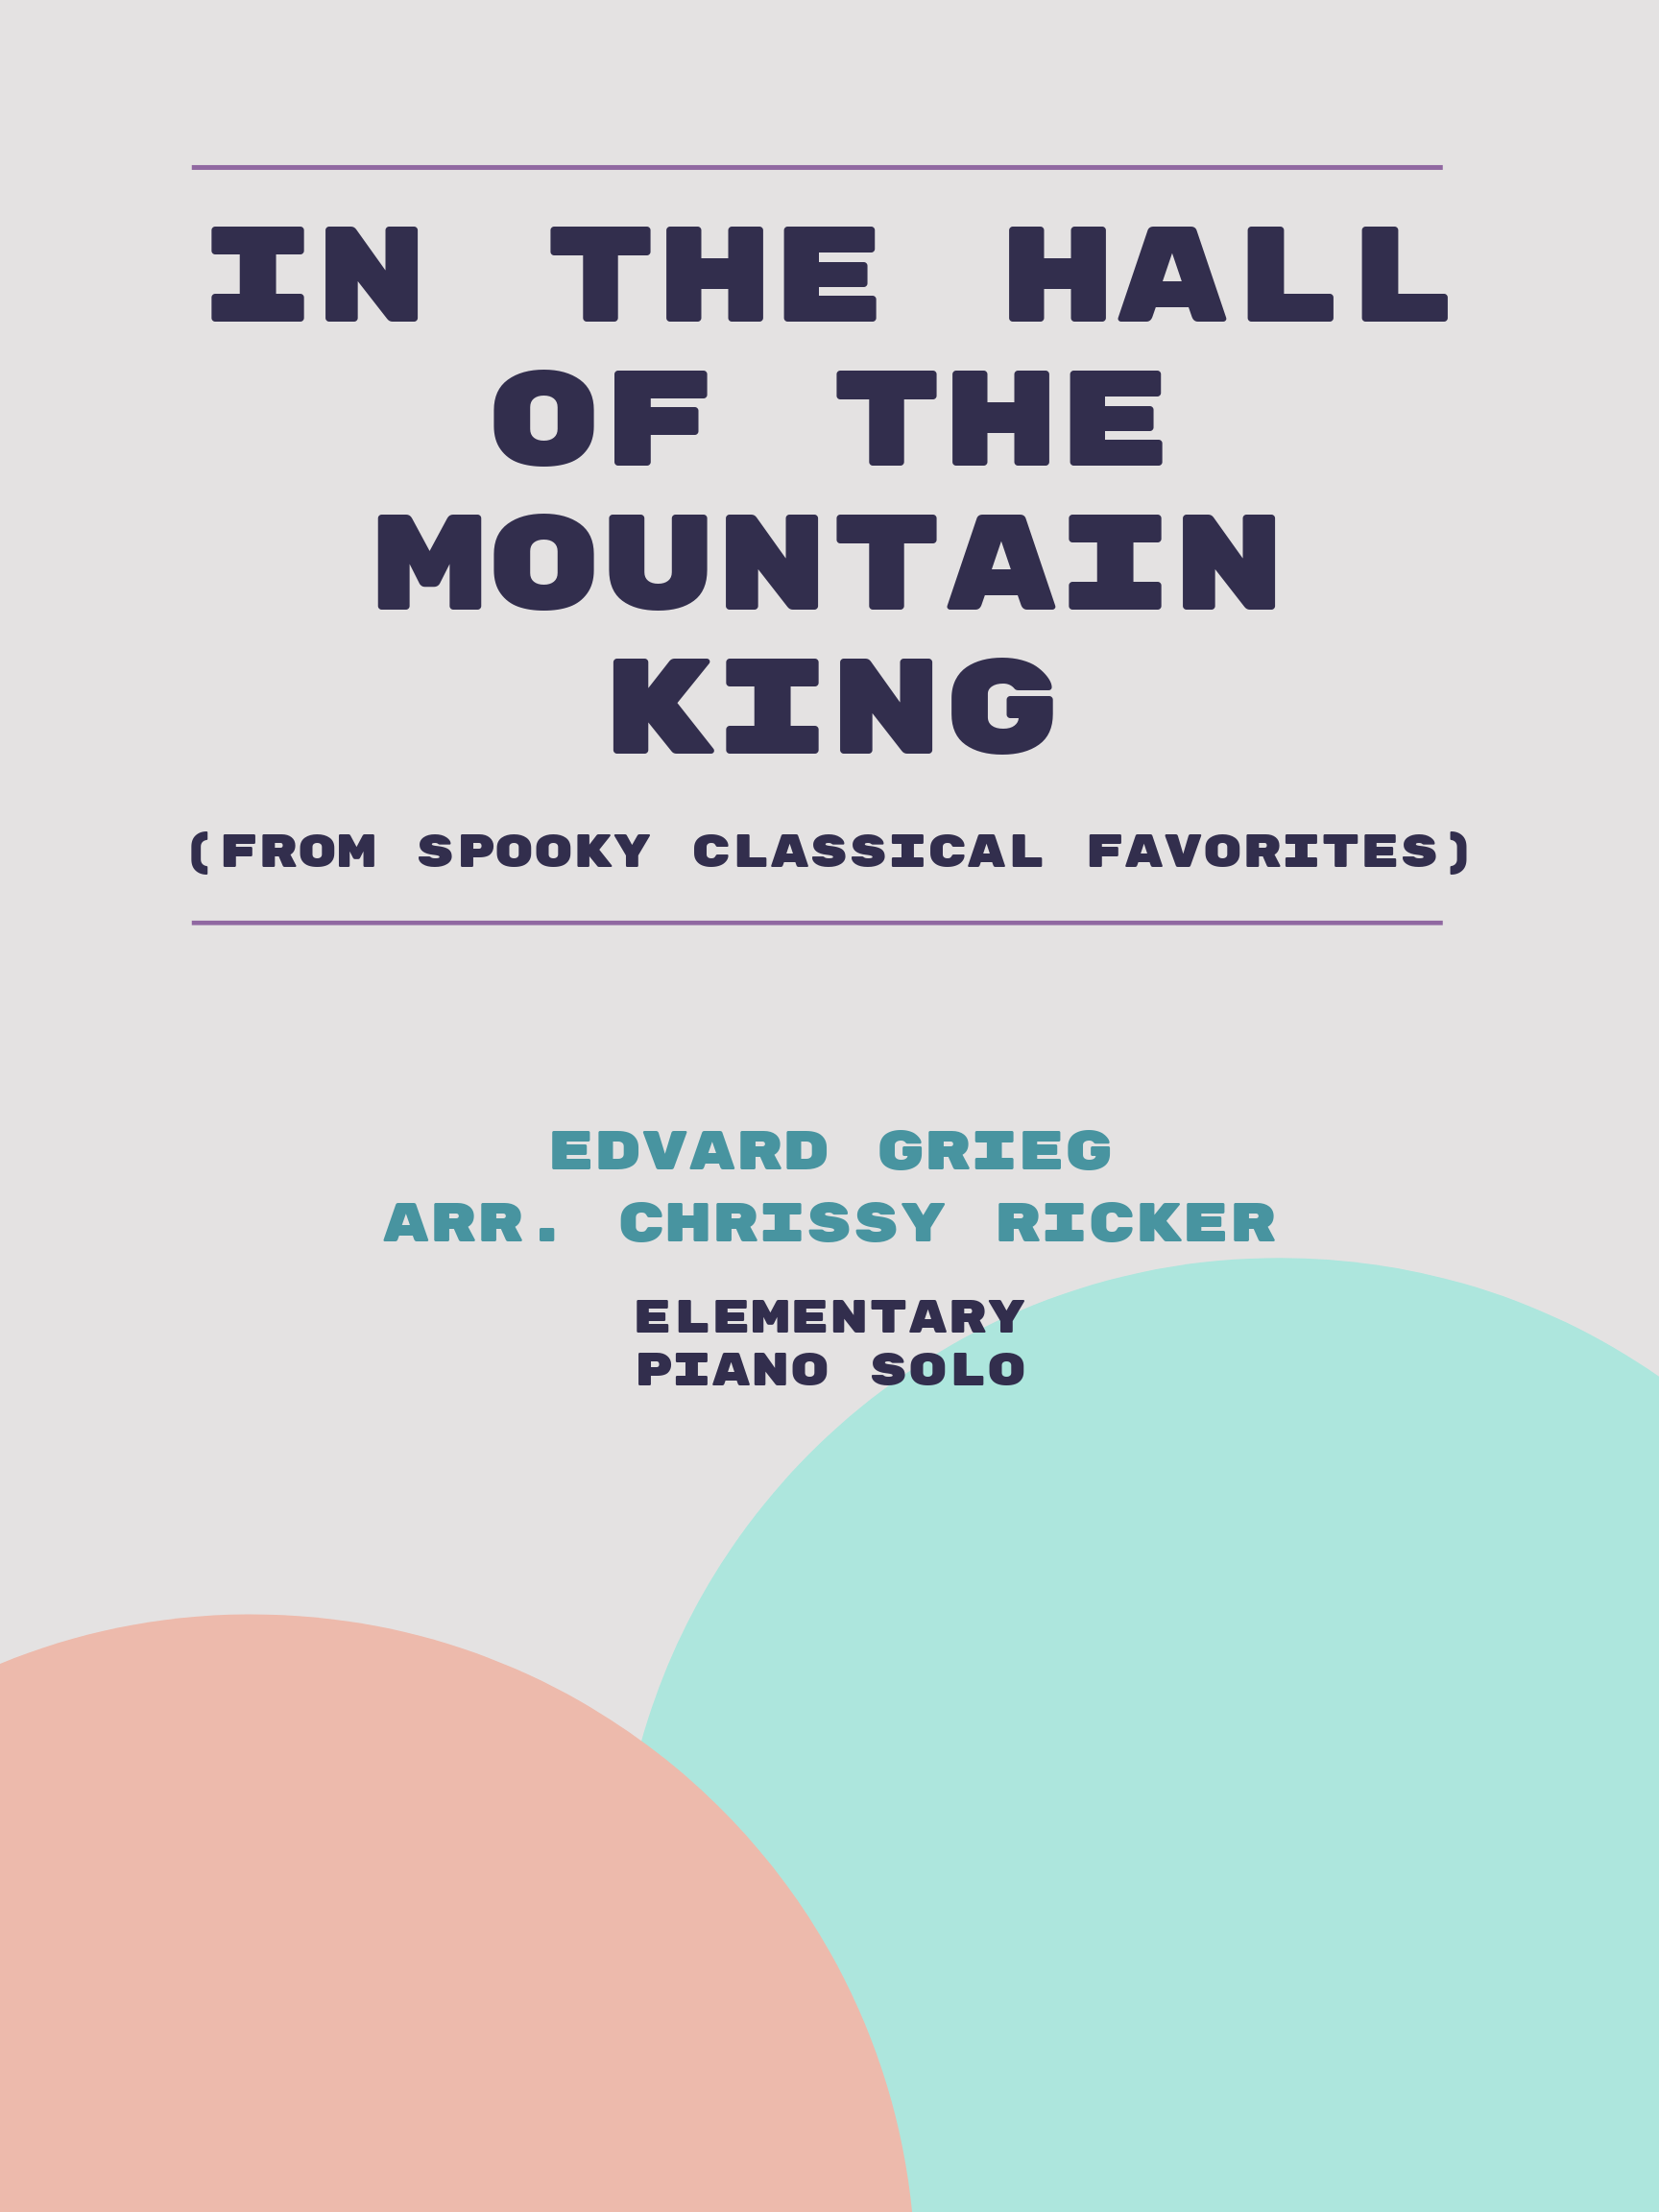 In the Hall of the Mountain King by Edvard Grieg